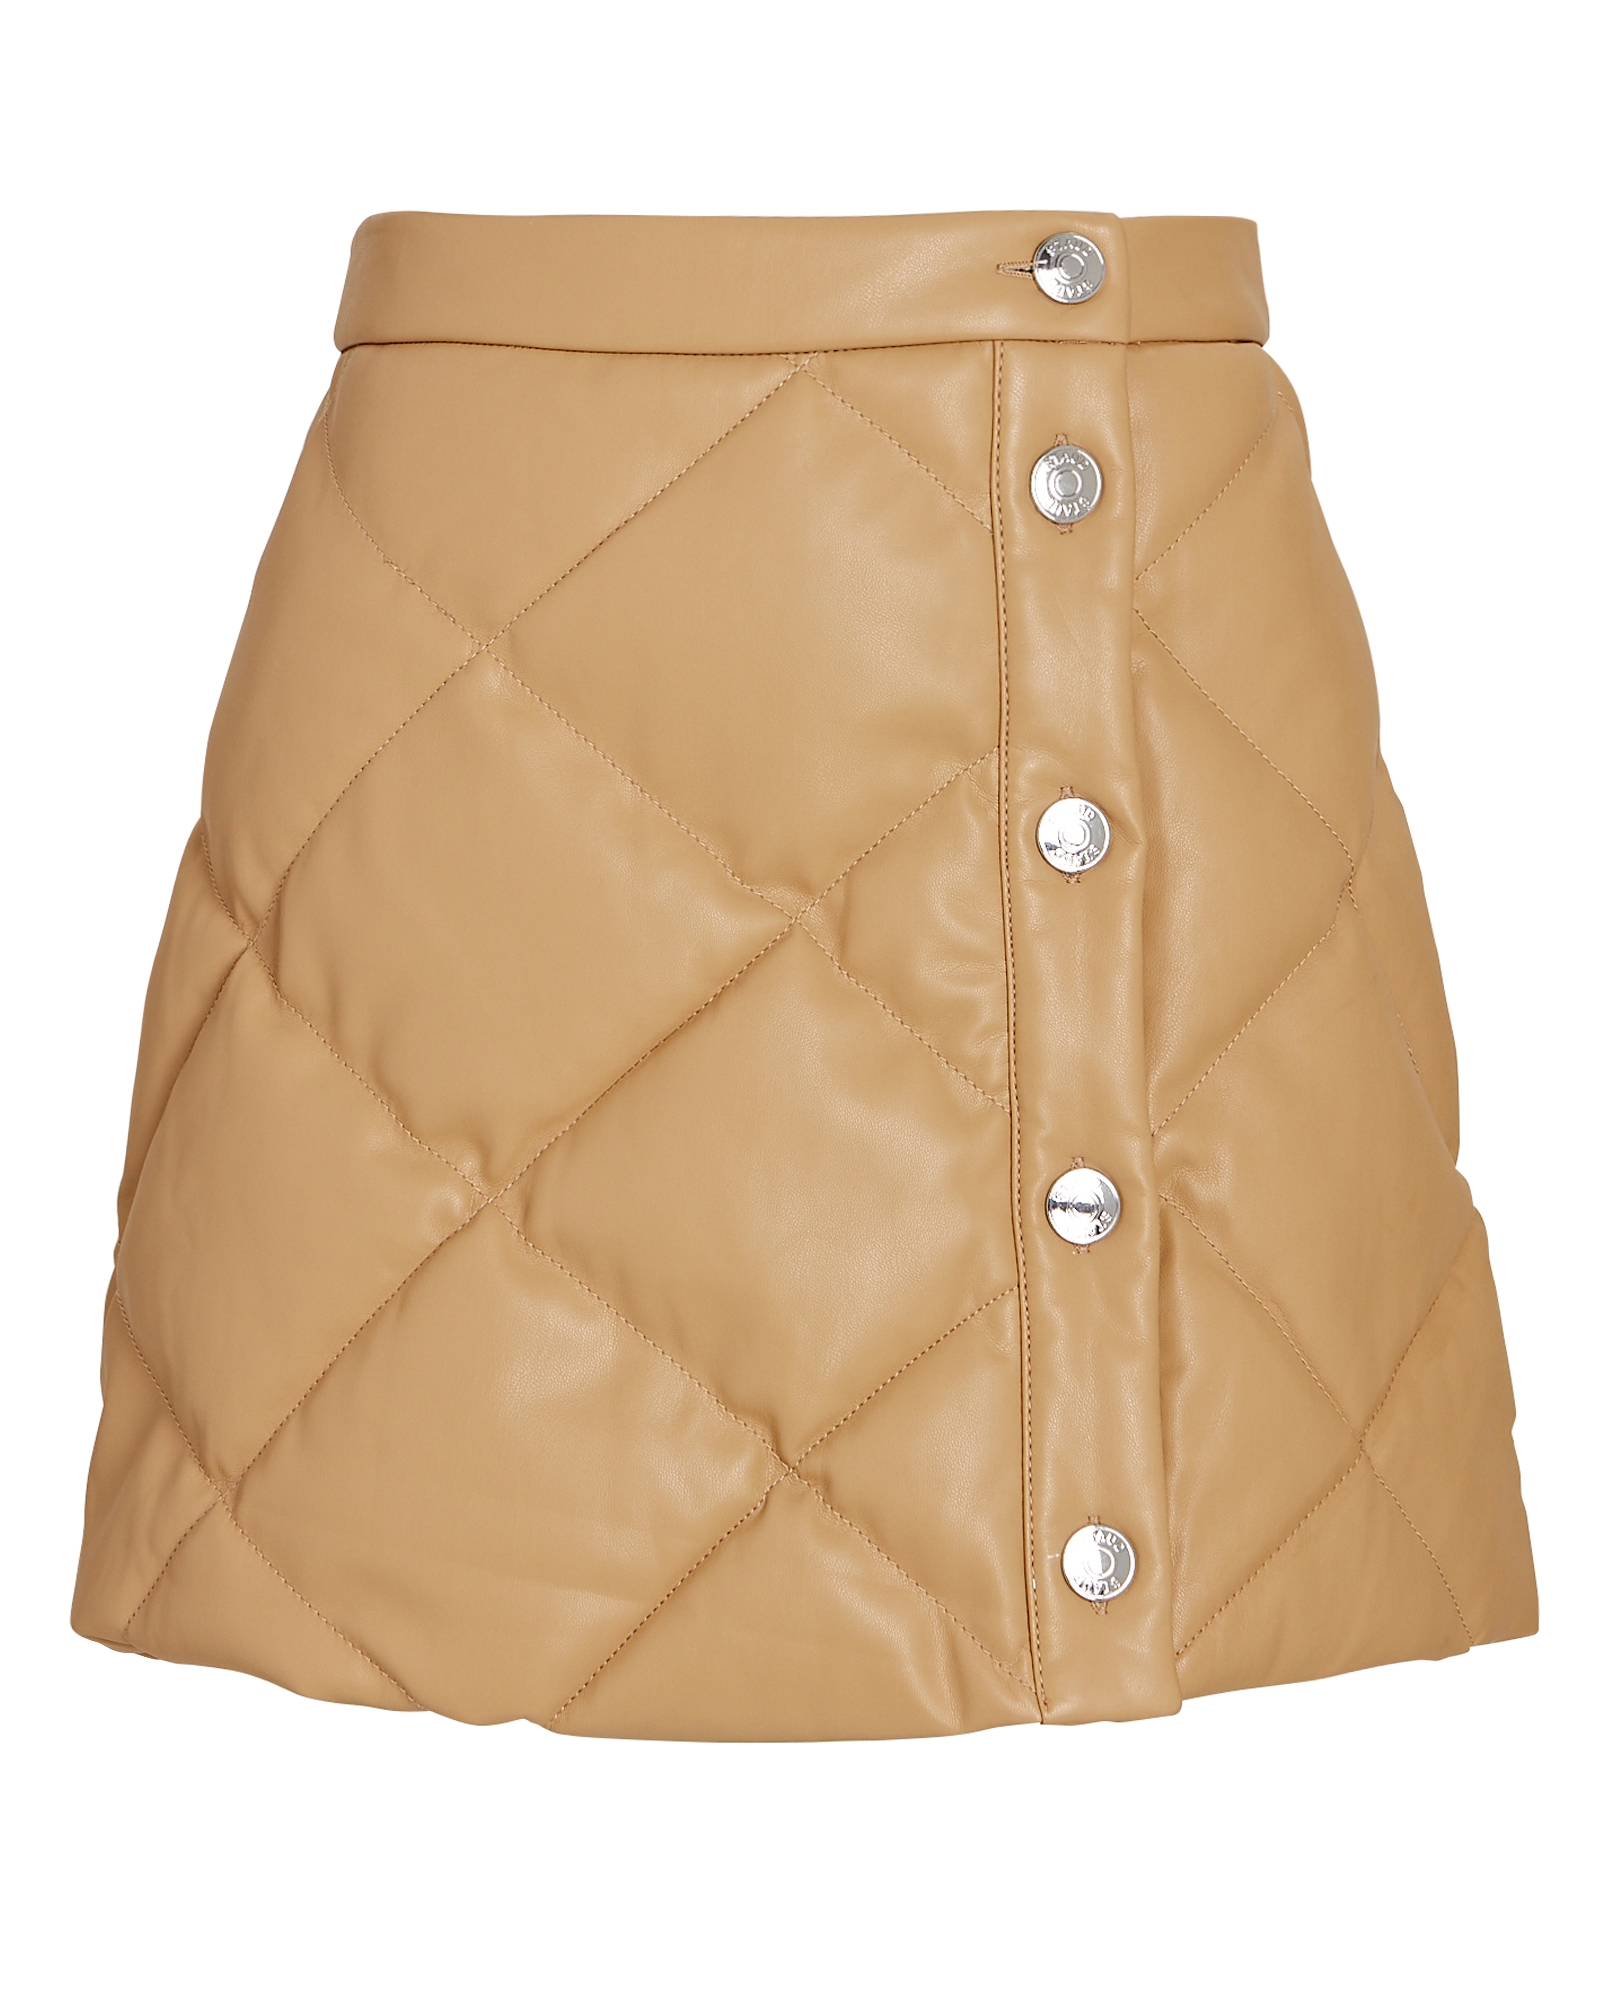 STAUD Dice Quilted Faux Leather Mini Skirt | INTERMIX®